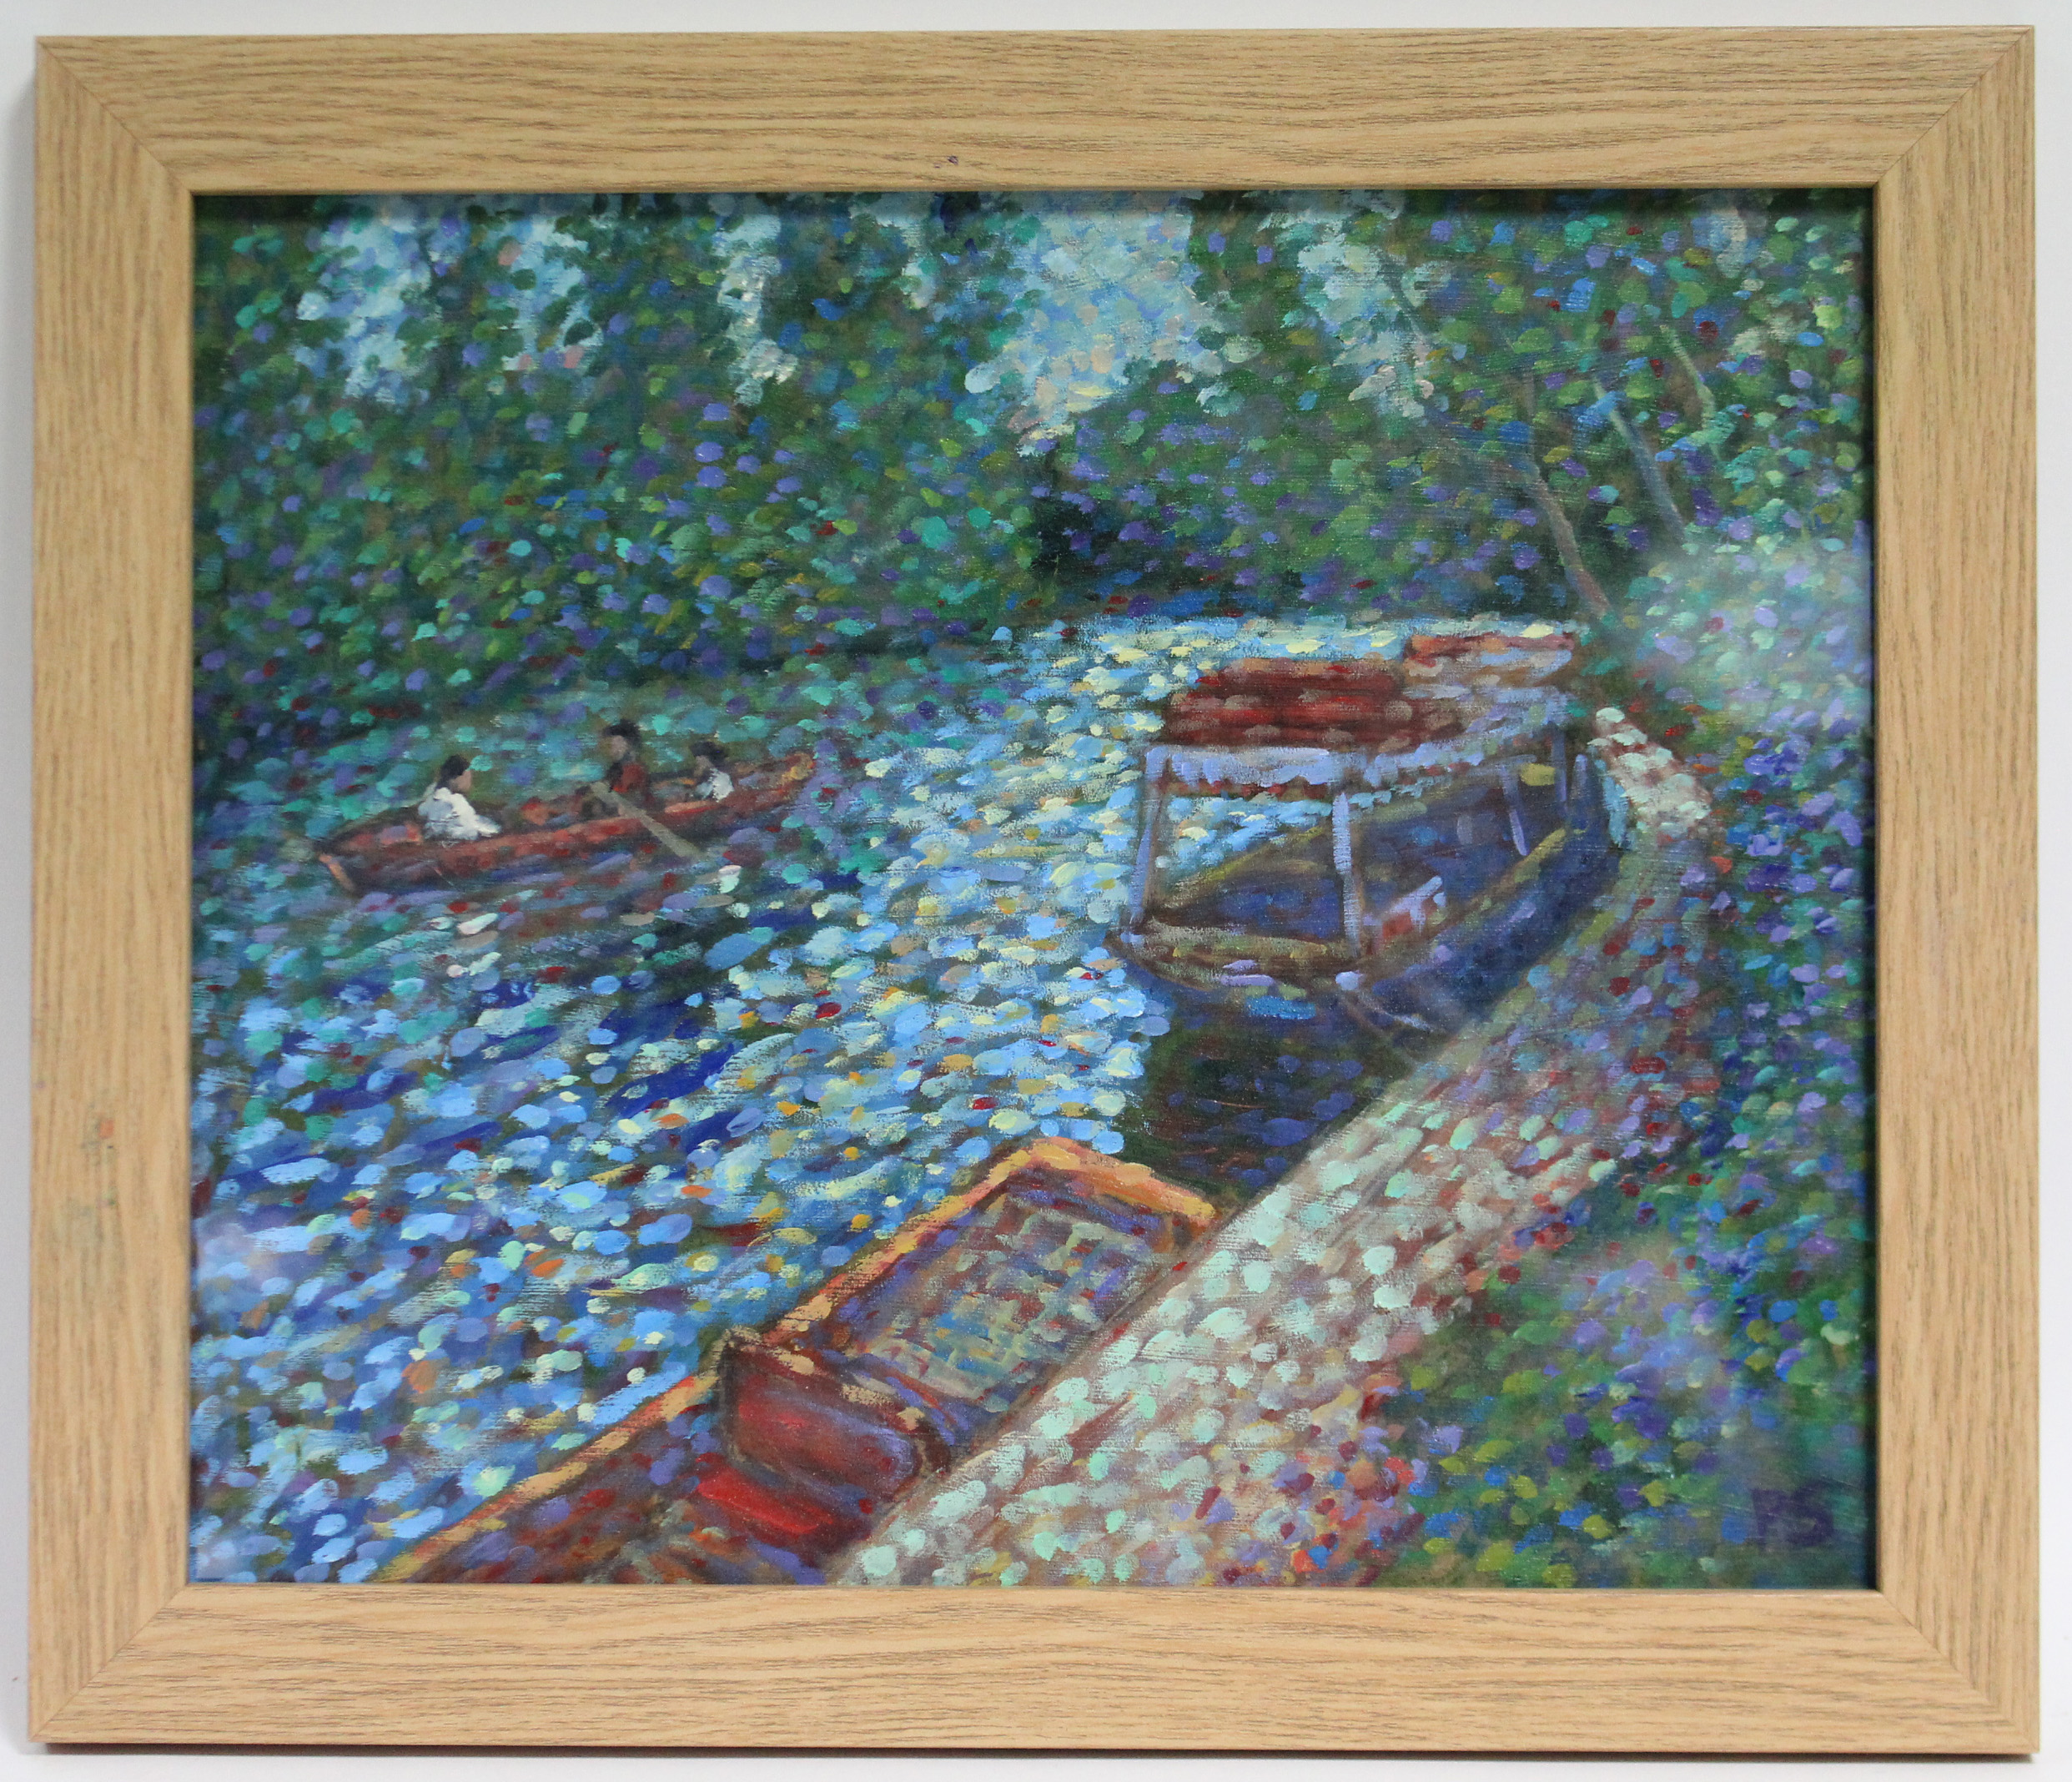 PAUL STEPHENS (contemporary). “Bath Boating, River Avon”. Signed with initials & inscribed verso;